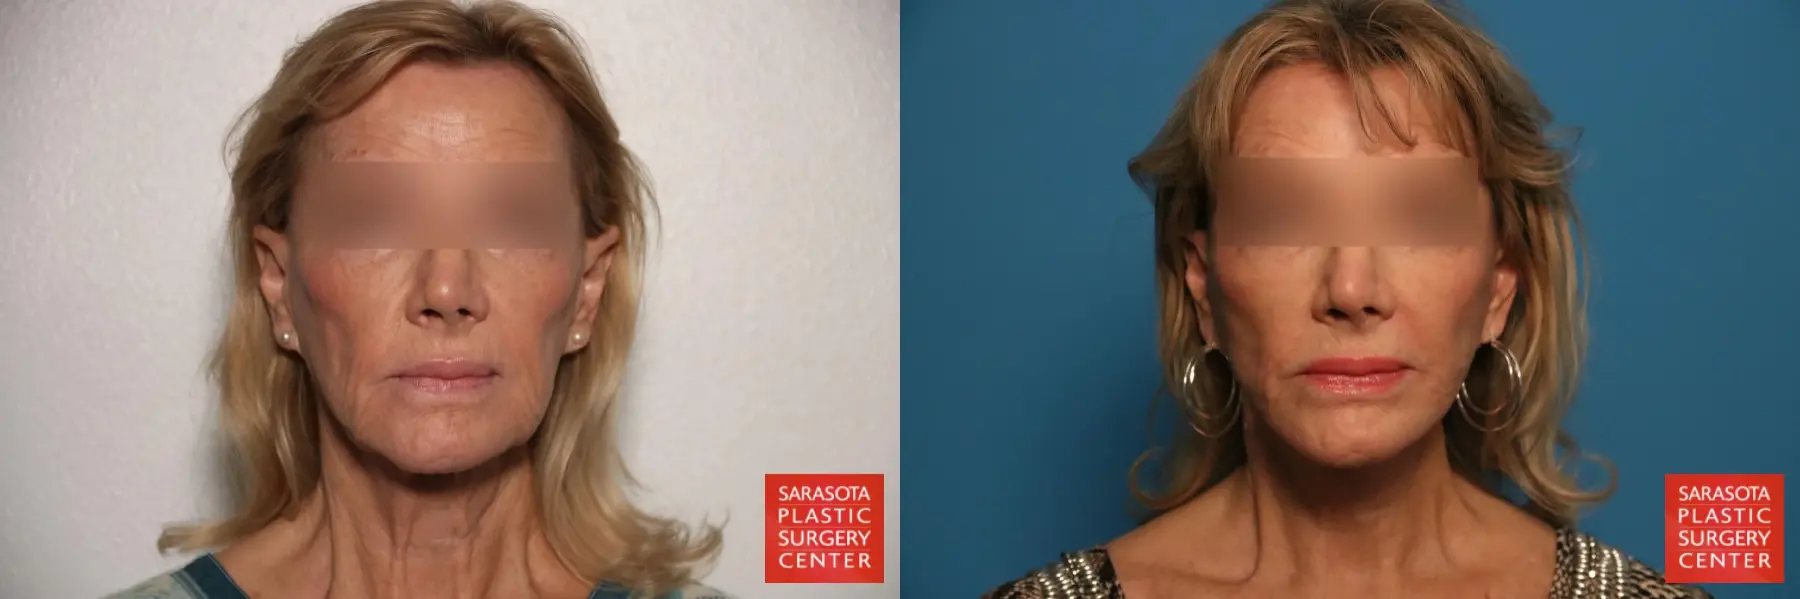 Facelift & Neck Lift: Patient 4 - Before and After  